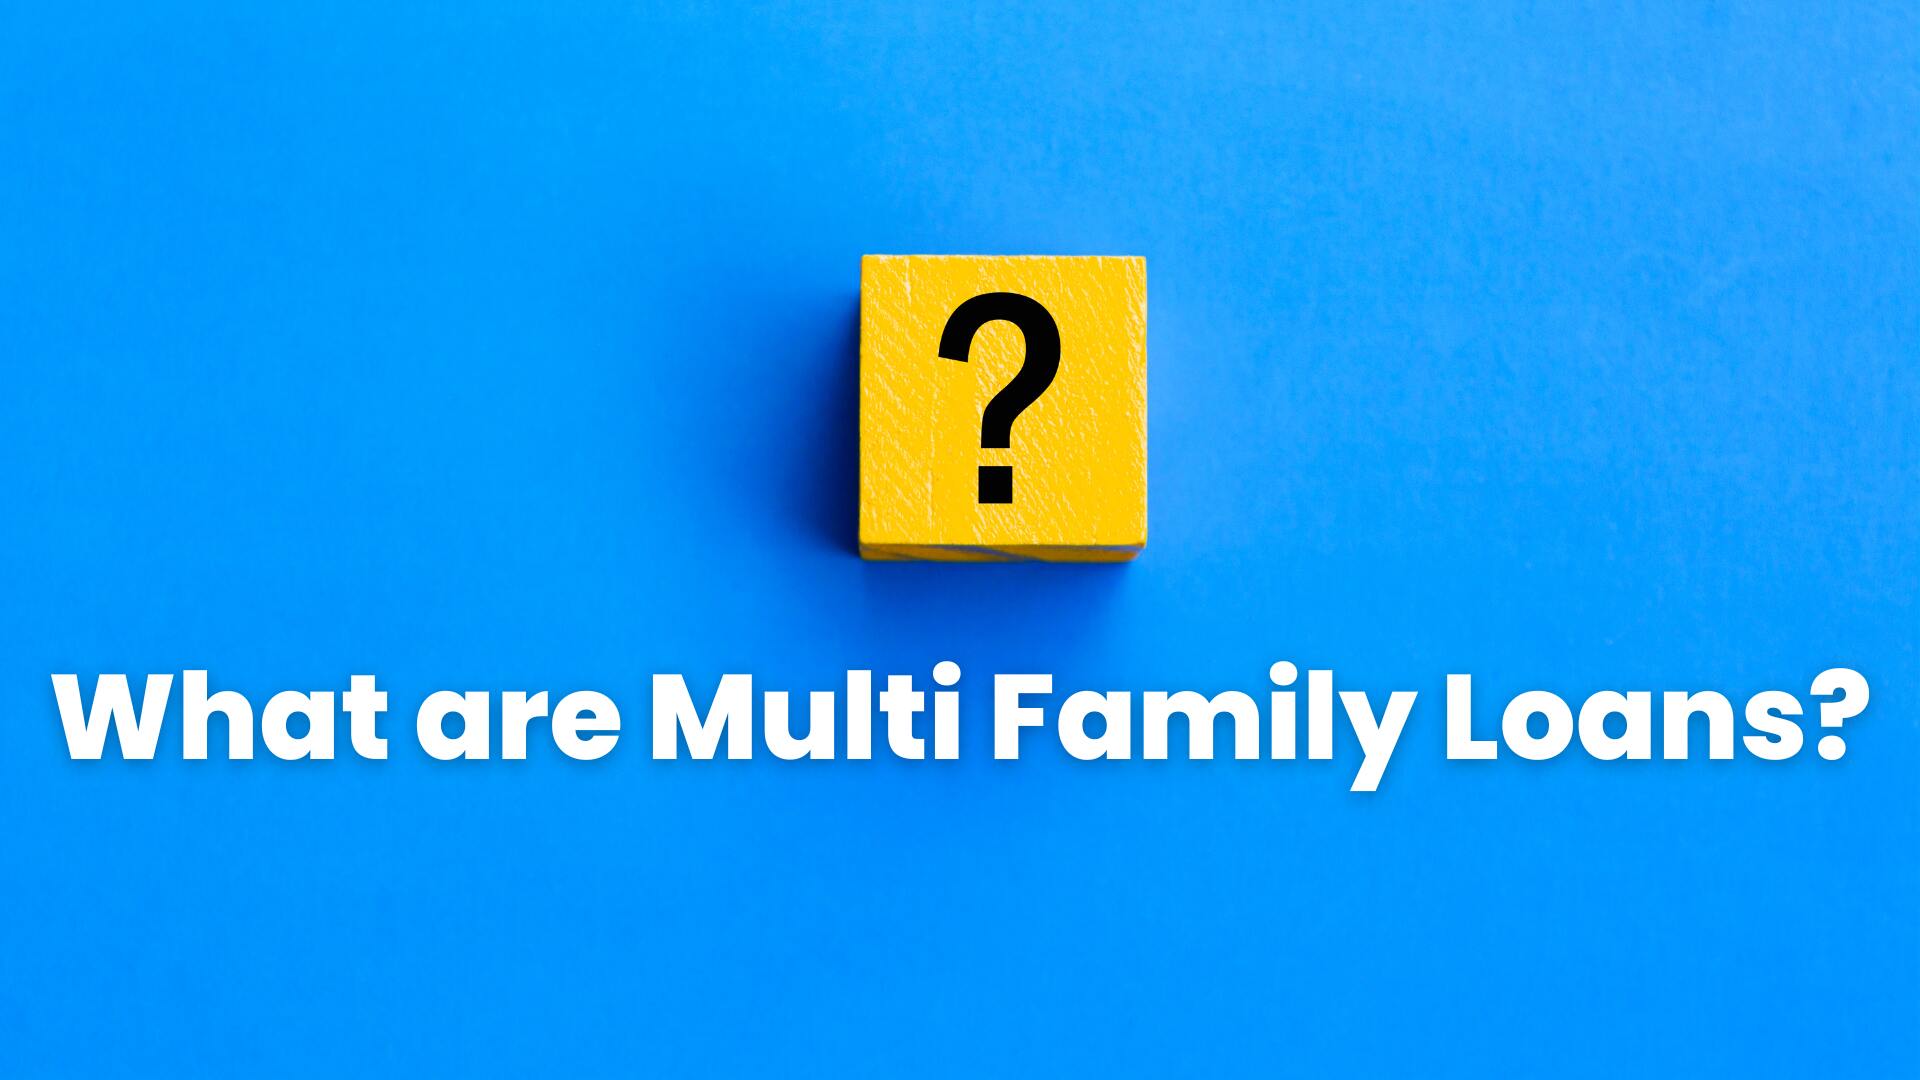 What are MultiFamily Loans?